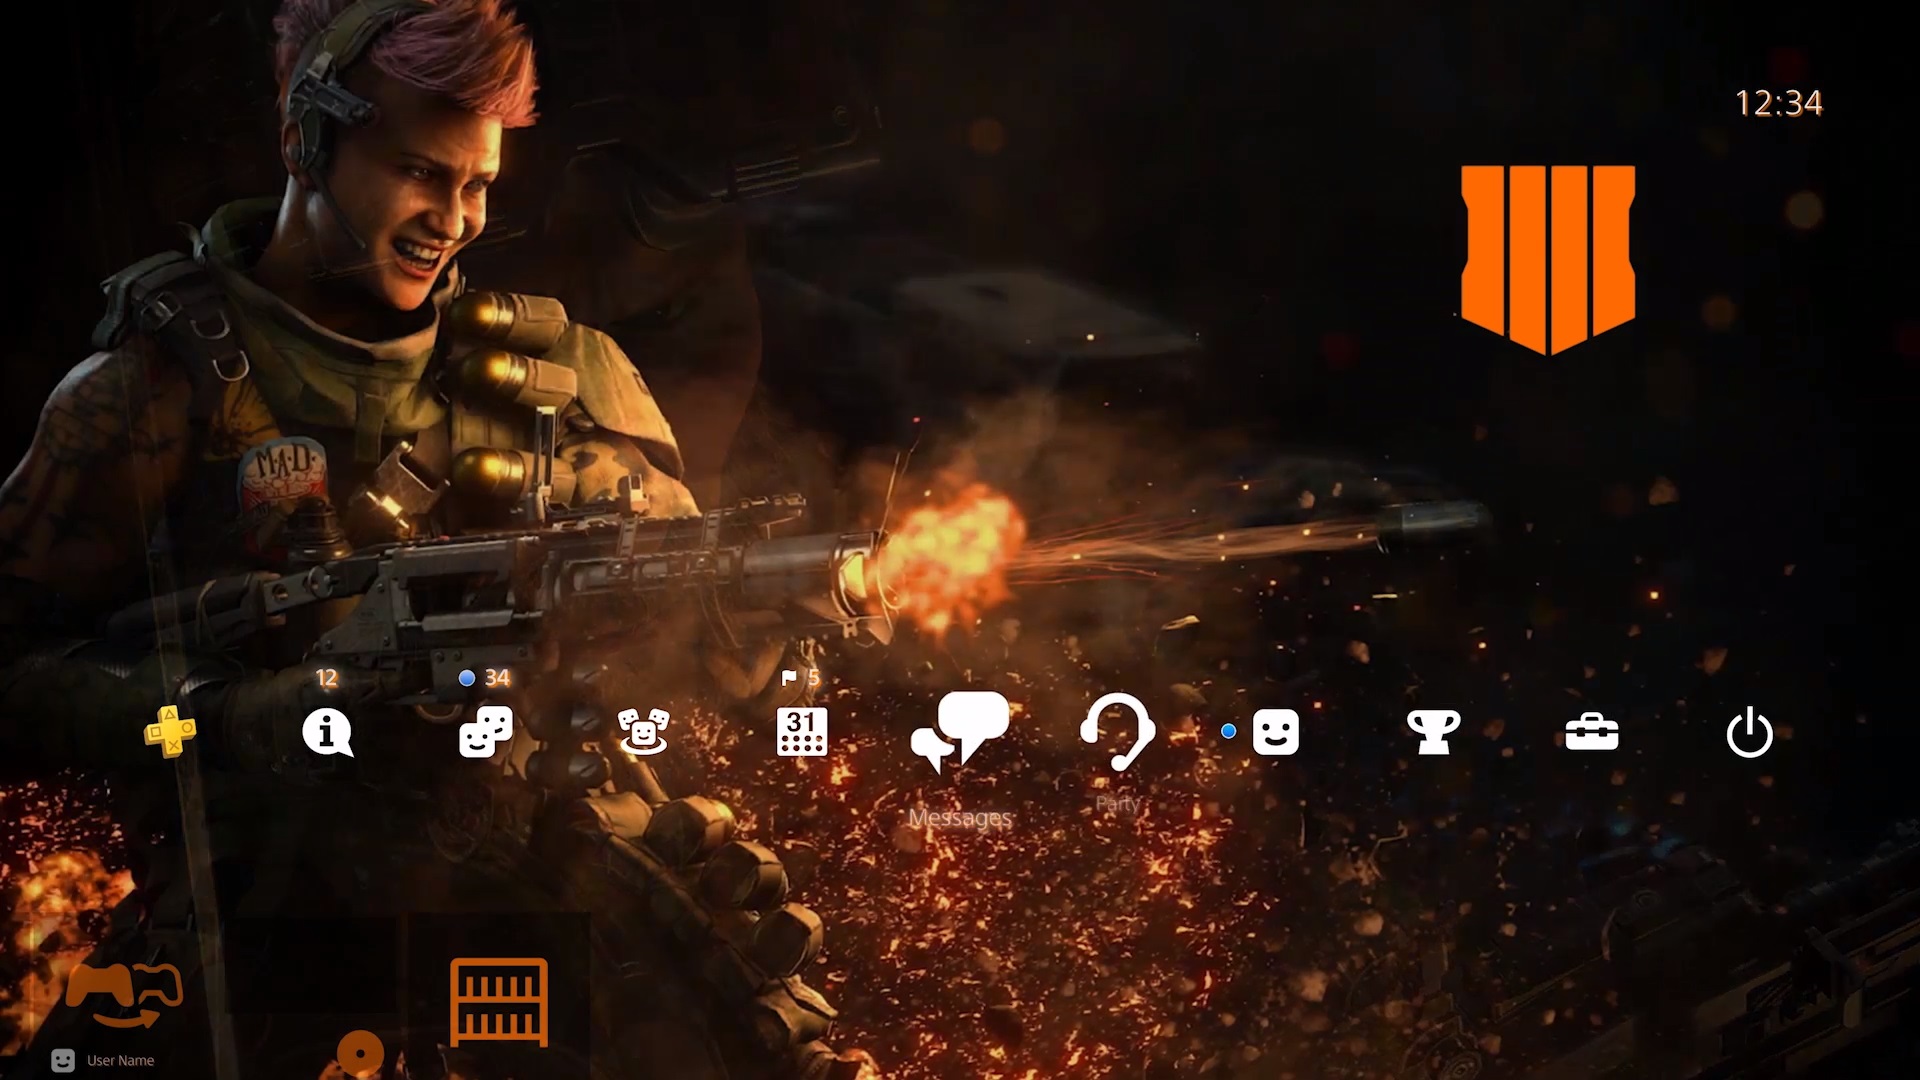 Free Call of Duty Ops 4 PS4 Theme Part of Launch Event Countdown Bonuses